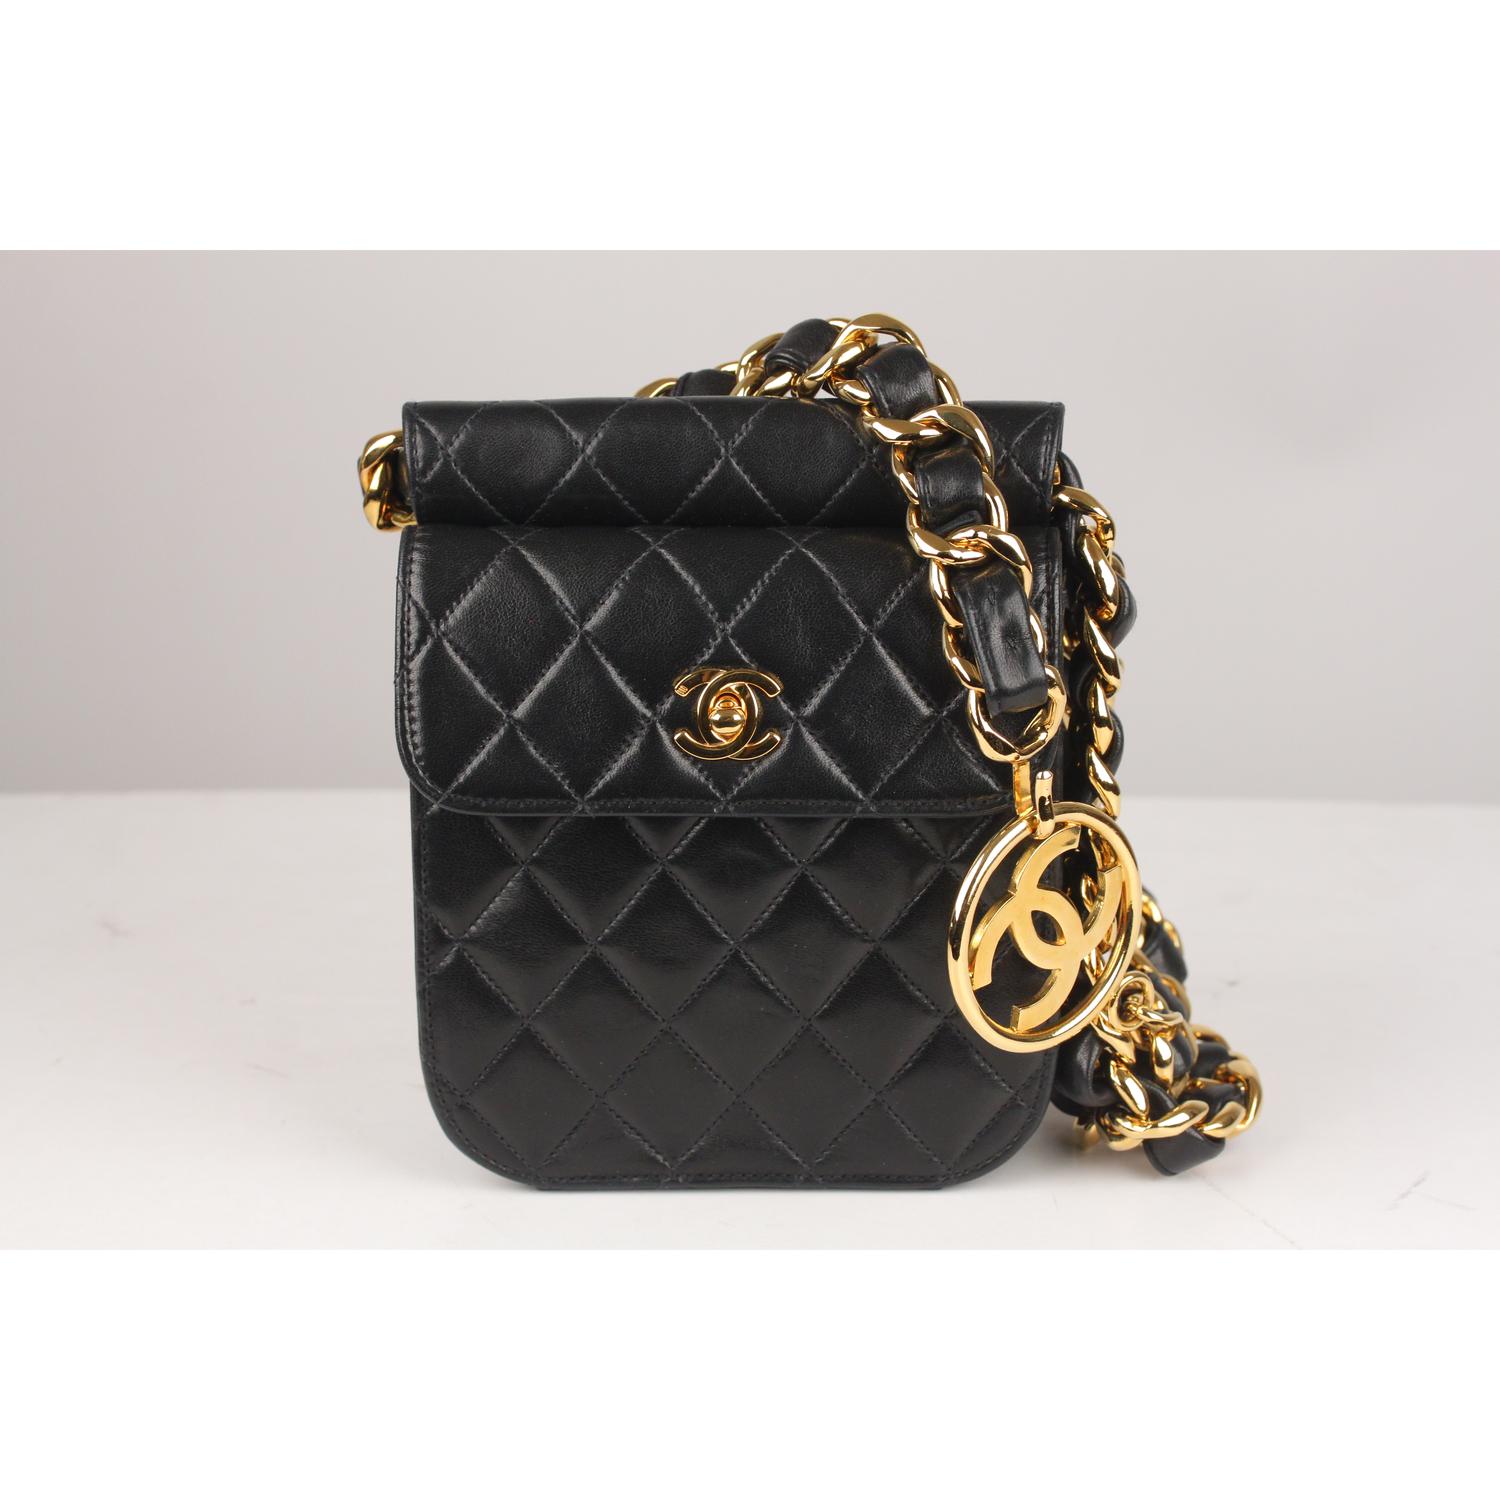 This bag will come with a Certificate of Authenticity provided by Entrupy, at no further cost.

- Chanel black quilted leather waist bag 
- Period/Era: from the F/W 1992 collection
- Chunky chain link and interwoven leather belt featuring big CC